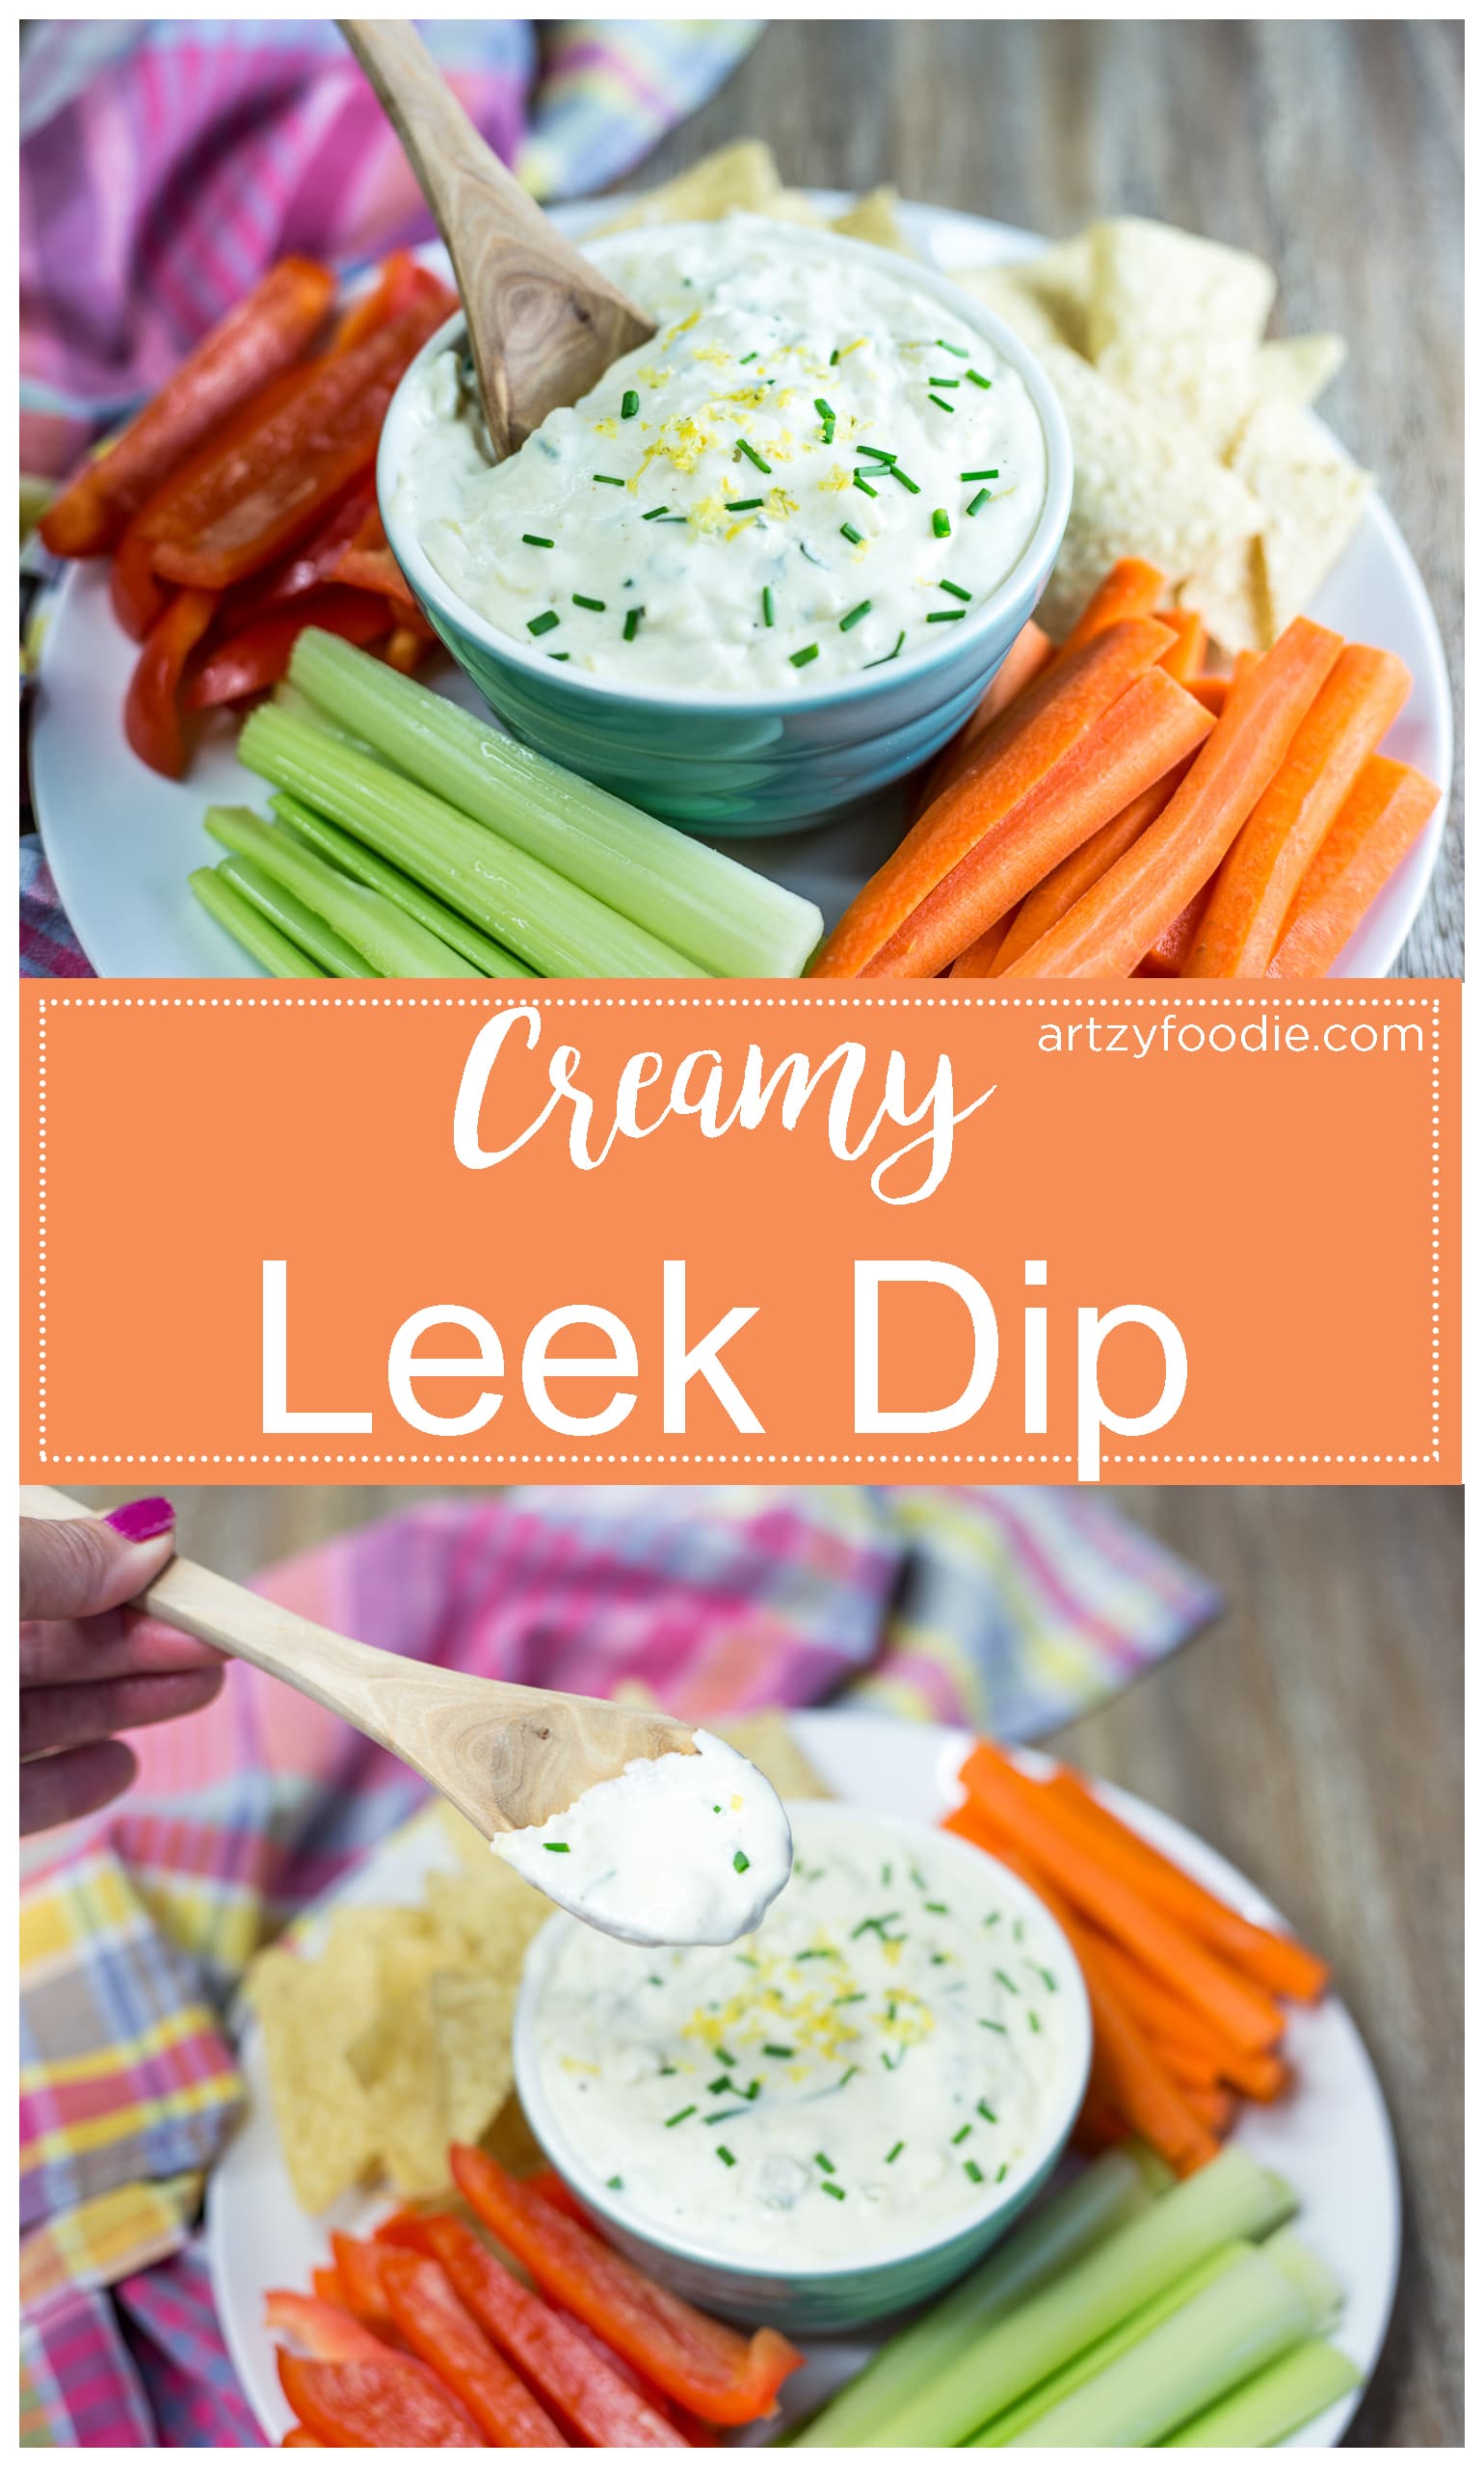 Creamy leek dip is a hot tangy creamy dip with a hint of spice that is to die for! |artzyfoodie.com|